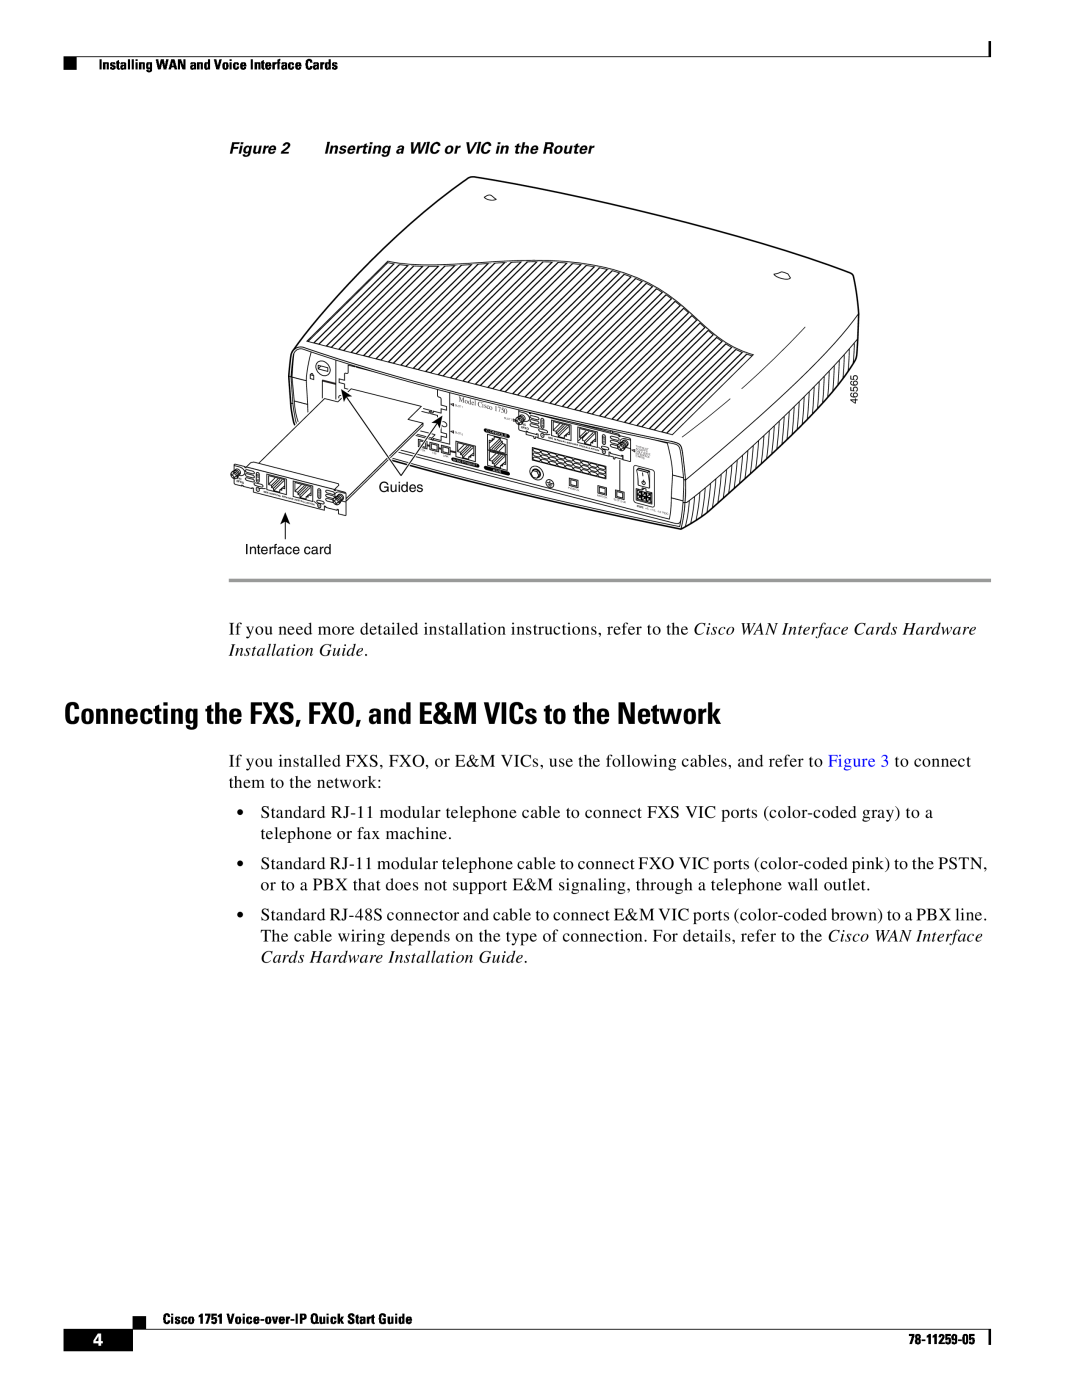 Cisco Systems CISCO1751 Connecting the FXS, FXO, and E&M VICs to the Network, Inserting a WIC or VIC in the Router 